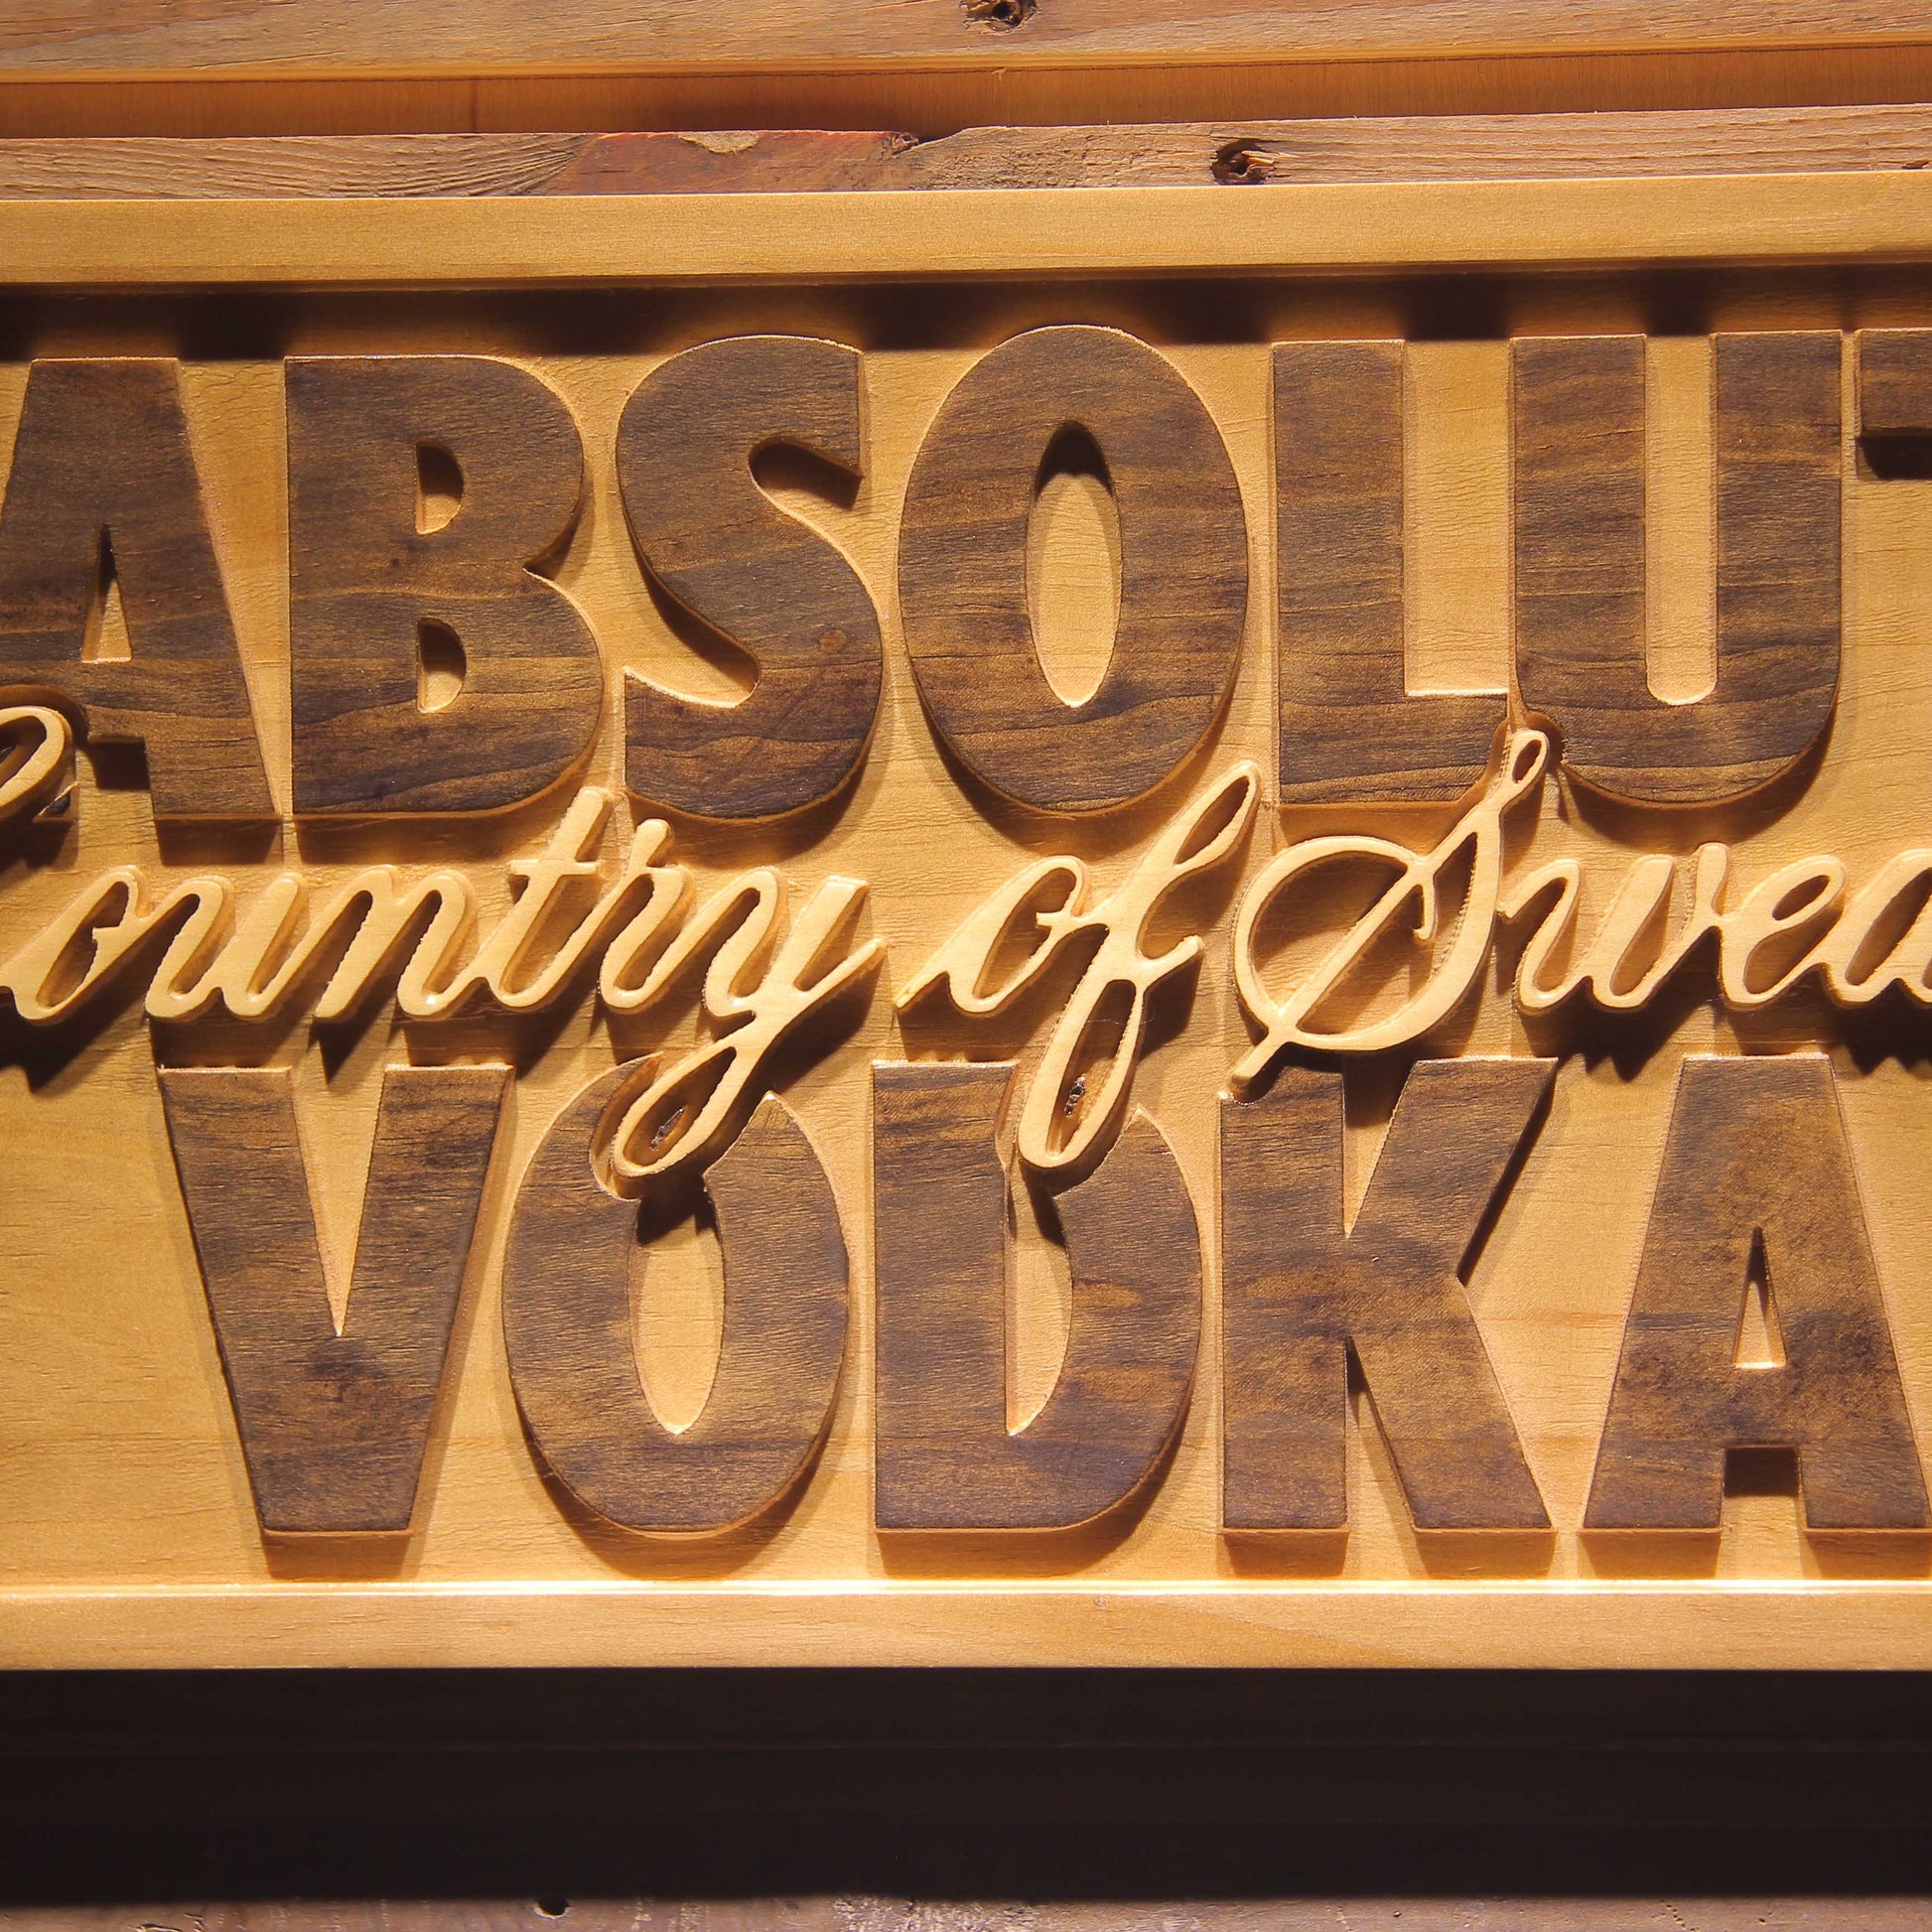 Absolut Vodka 3D Wooden Signs by Woody Signs Co. - Handmade Crafted Unique Wooden Creative